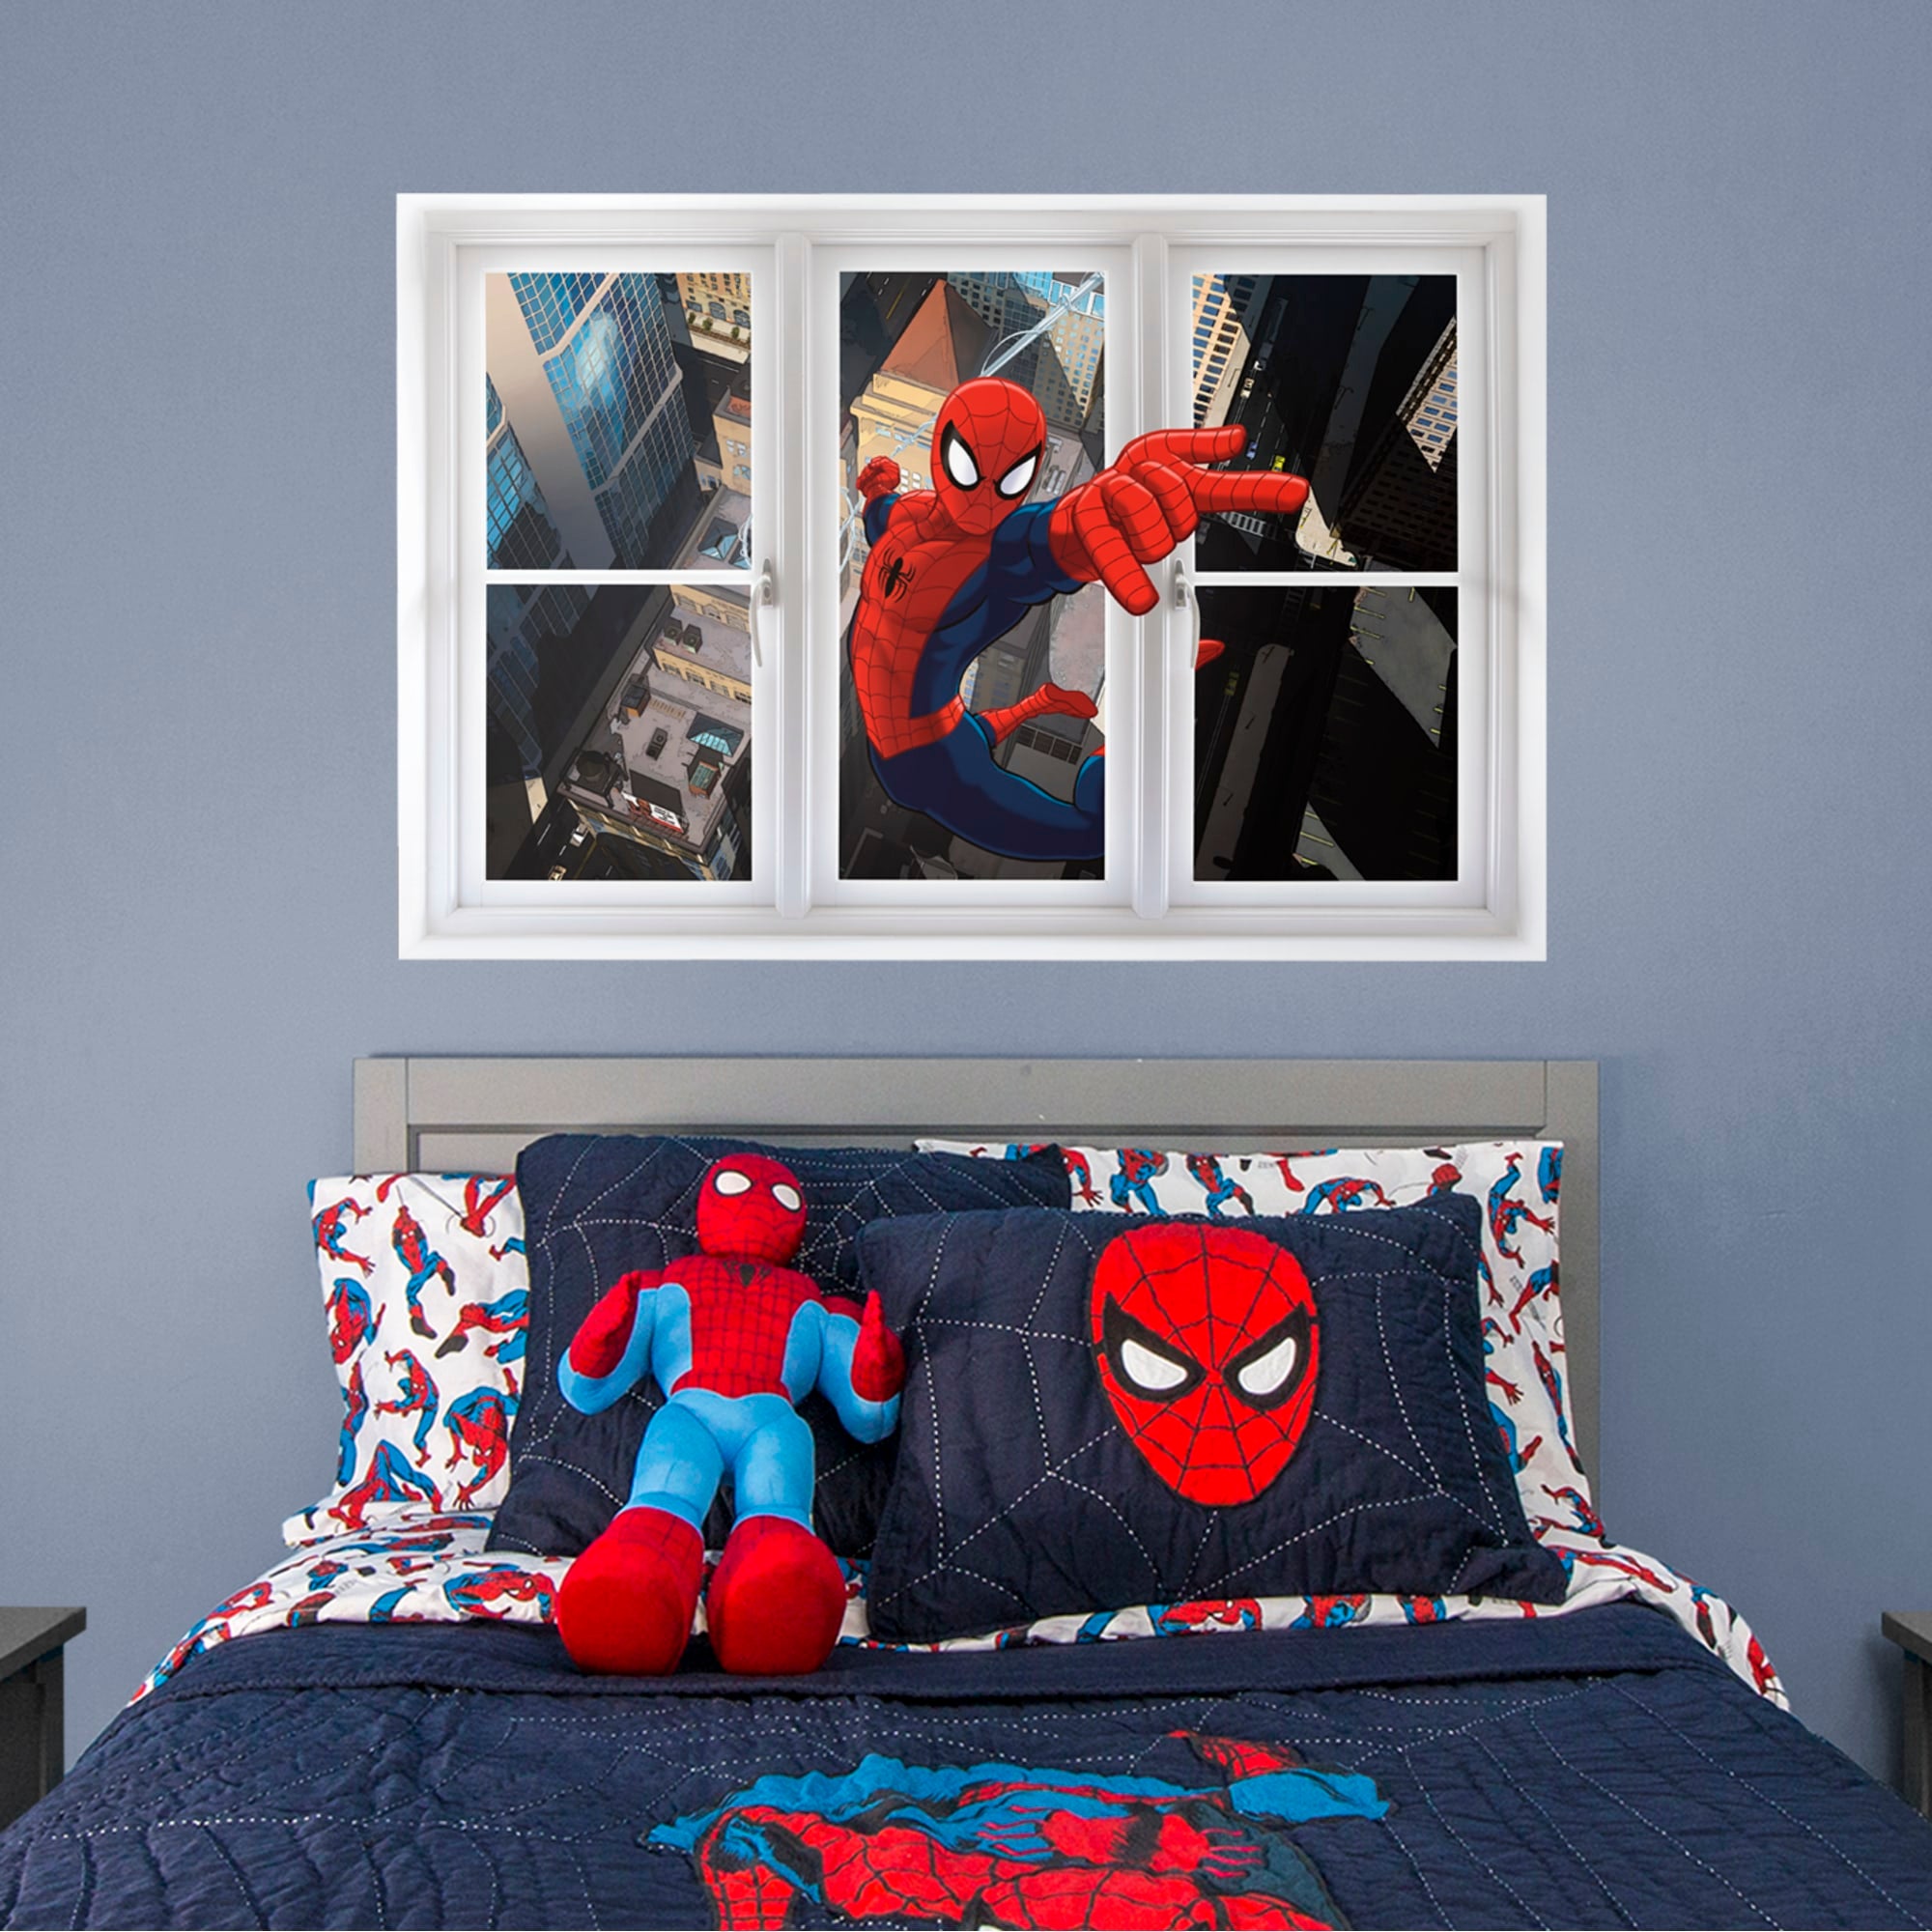 Spider-Man: Swing Instant Window - Officially Licensed Removable Wall Decal 51.0"W x 34.0"H by Fathead | Vinyl